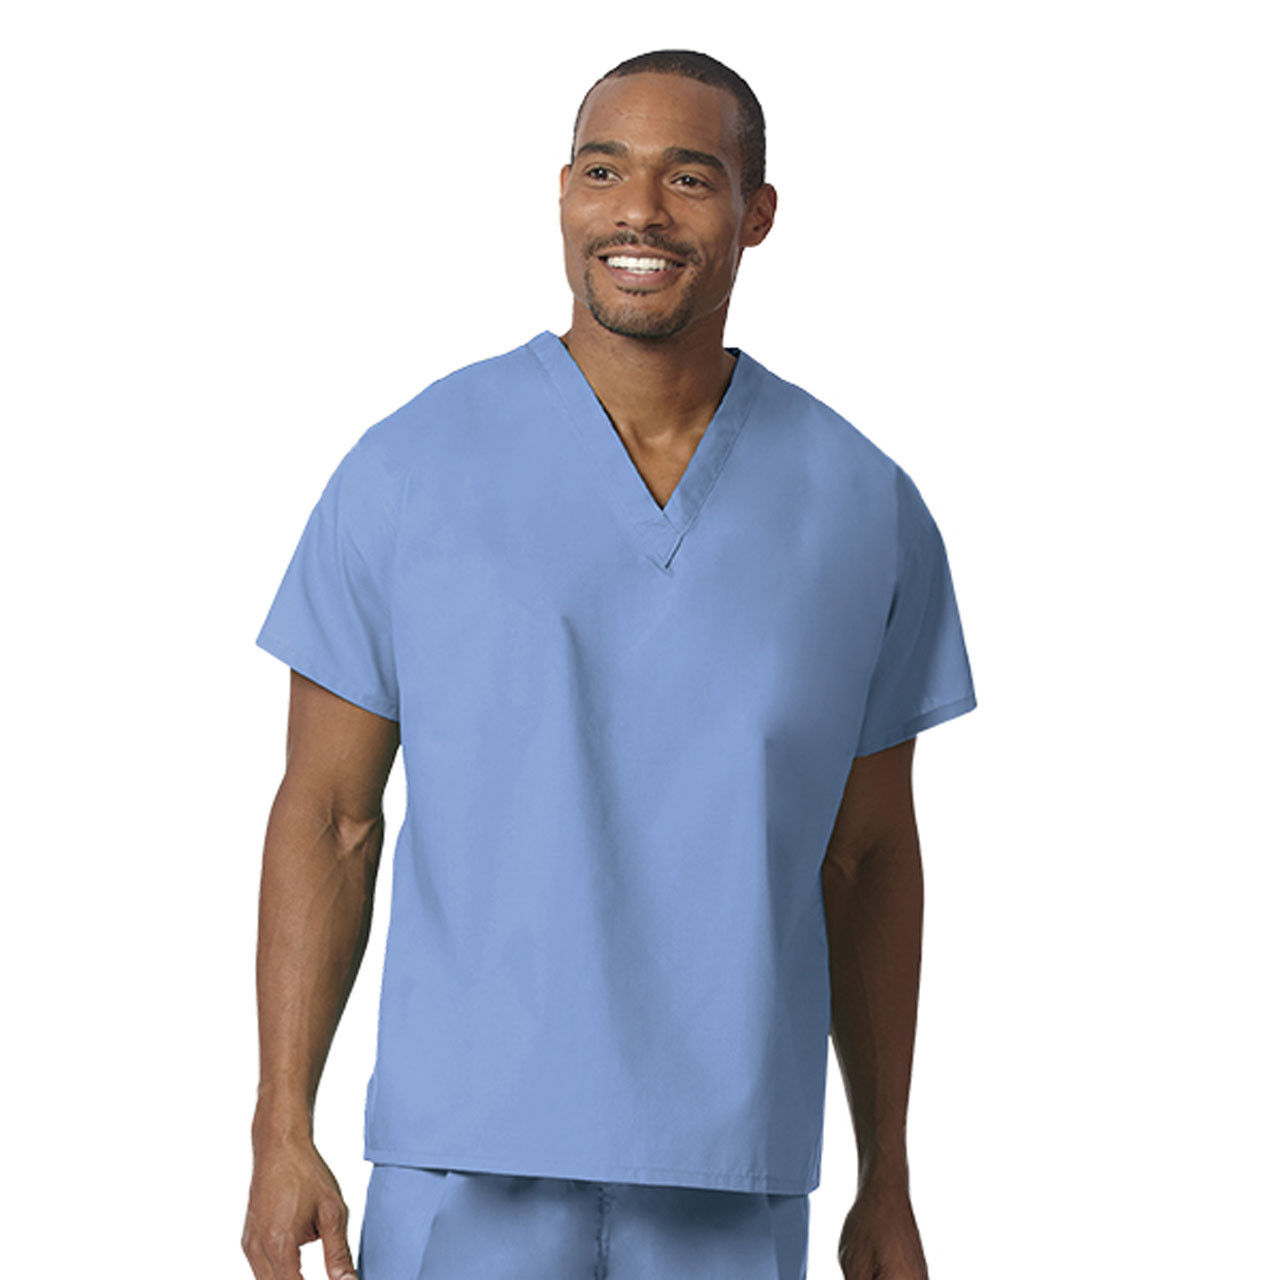 What is the durability of the blue surgical scrubs in the Unisex Reversible Scrub Set?